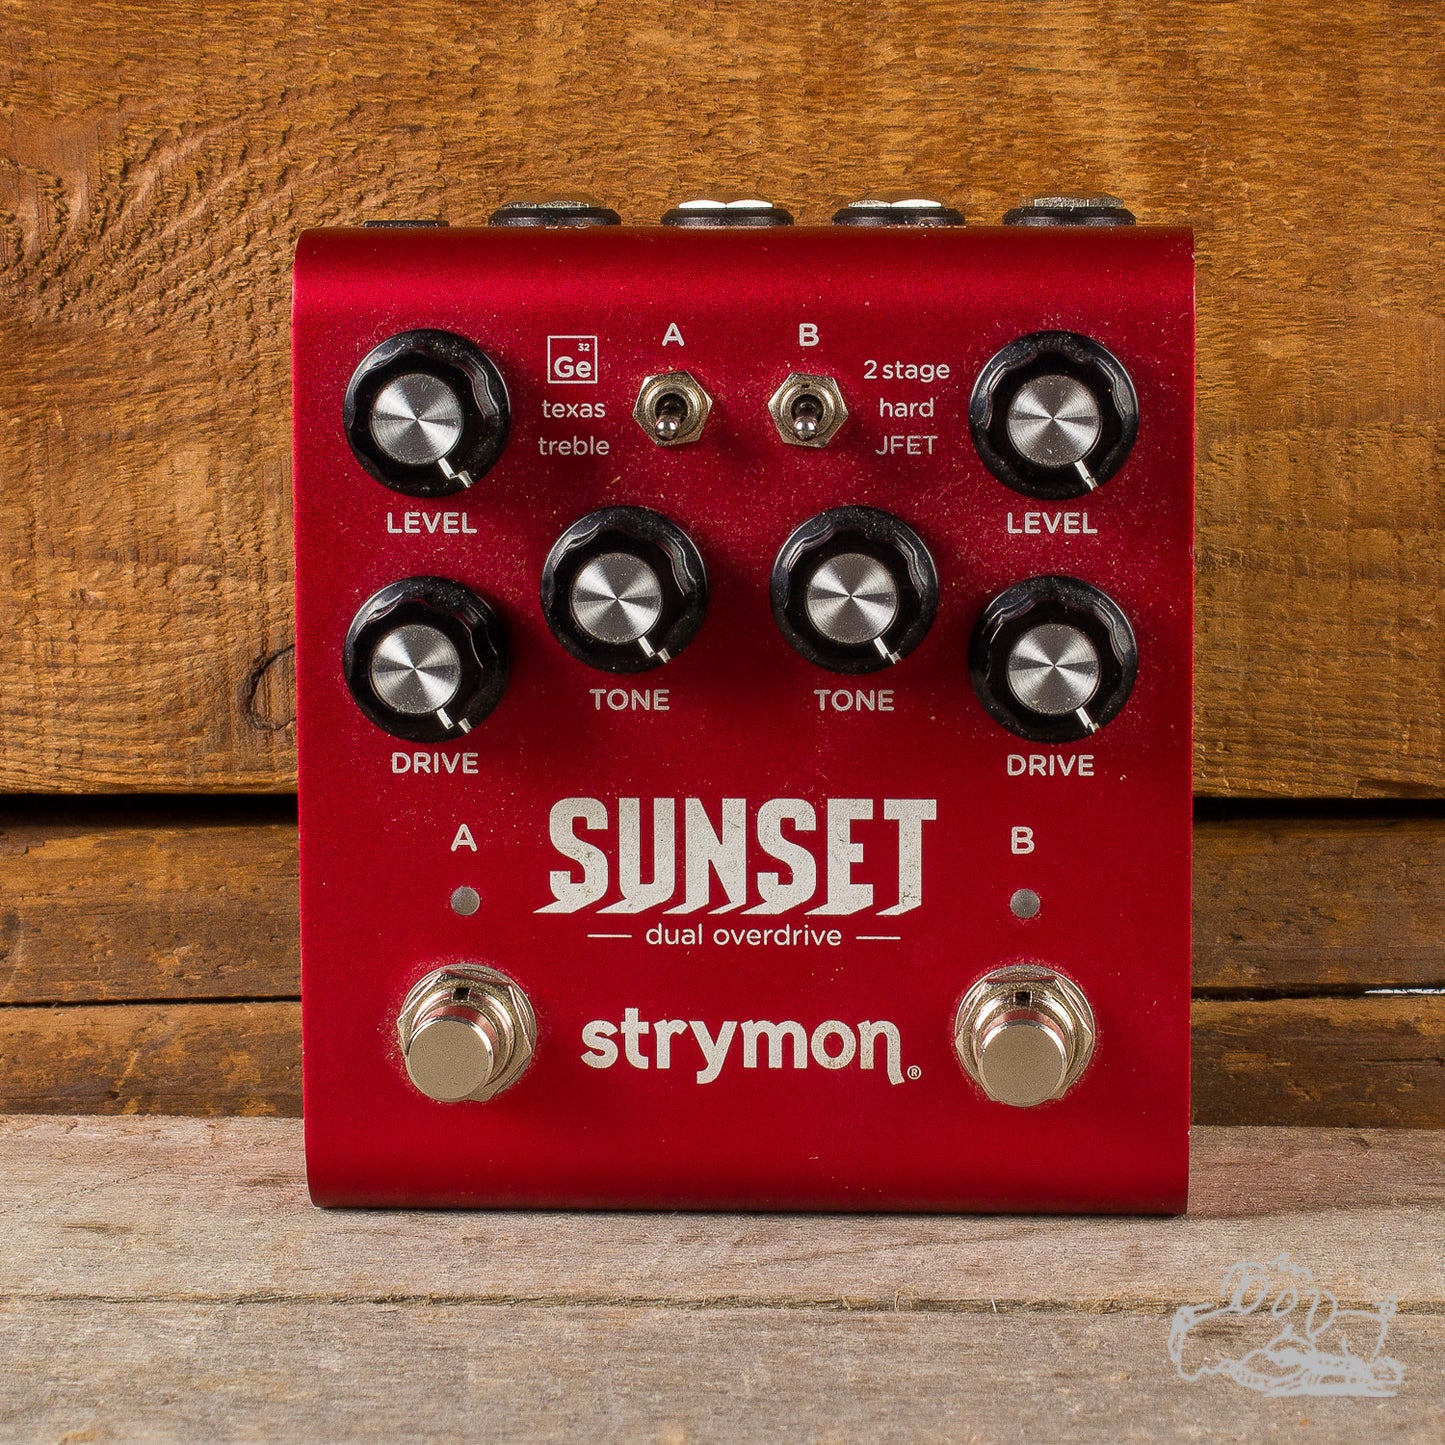 Used Strymon Sunset Dual Overdrive Guitar Pedal